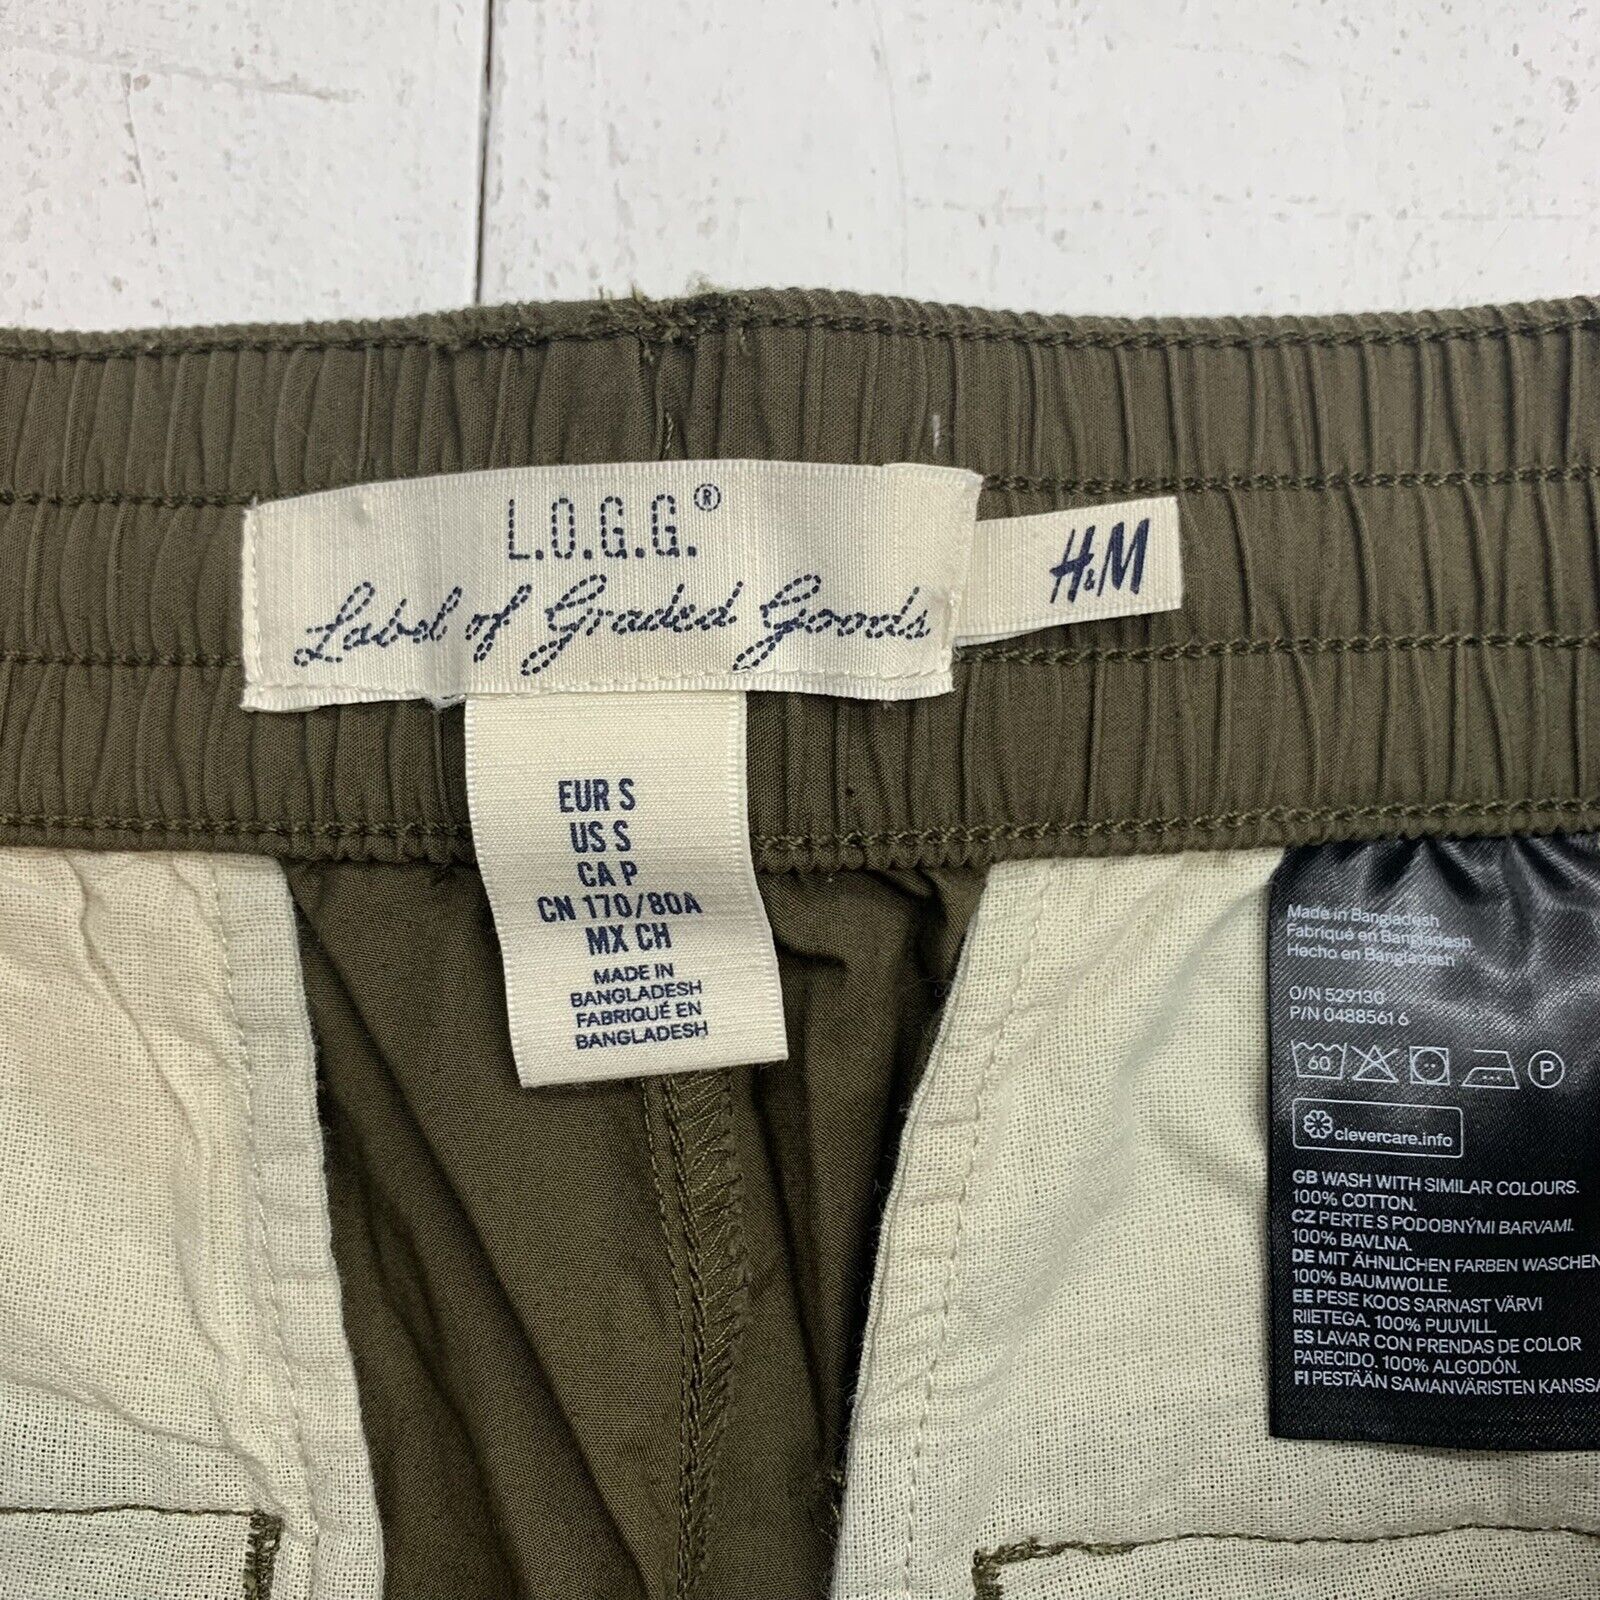 HM Label of Graded Goods Classic Cargos Waist Size 3234 120 Cedis Dm to  Purchase   Instagram